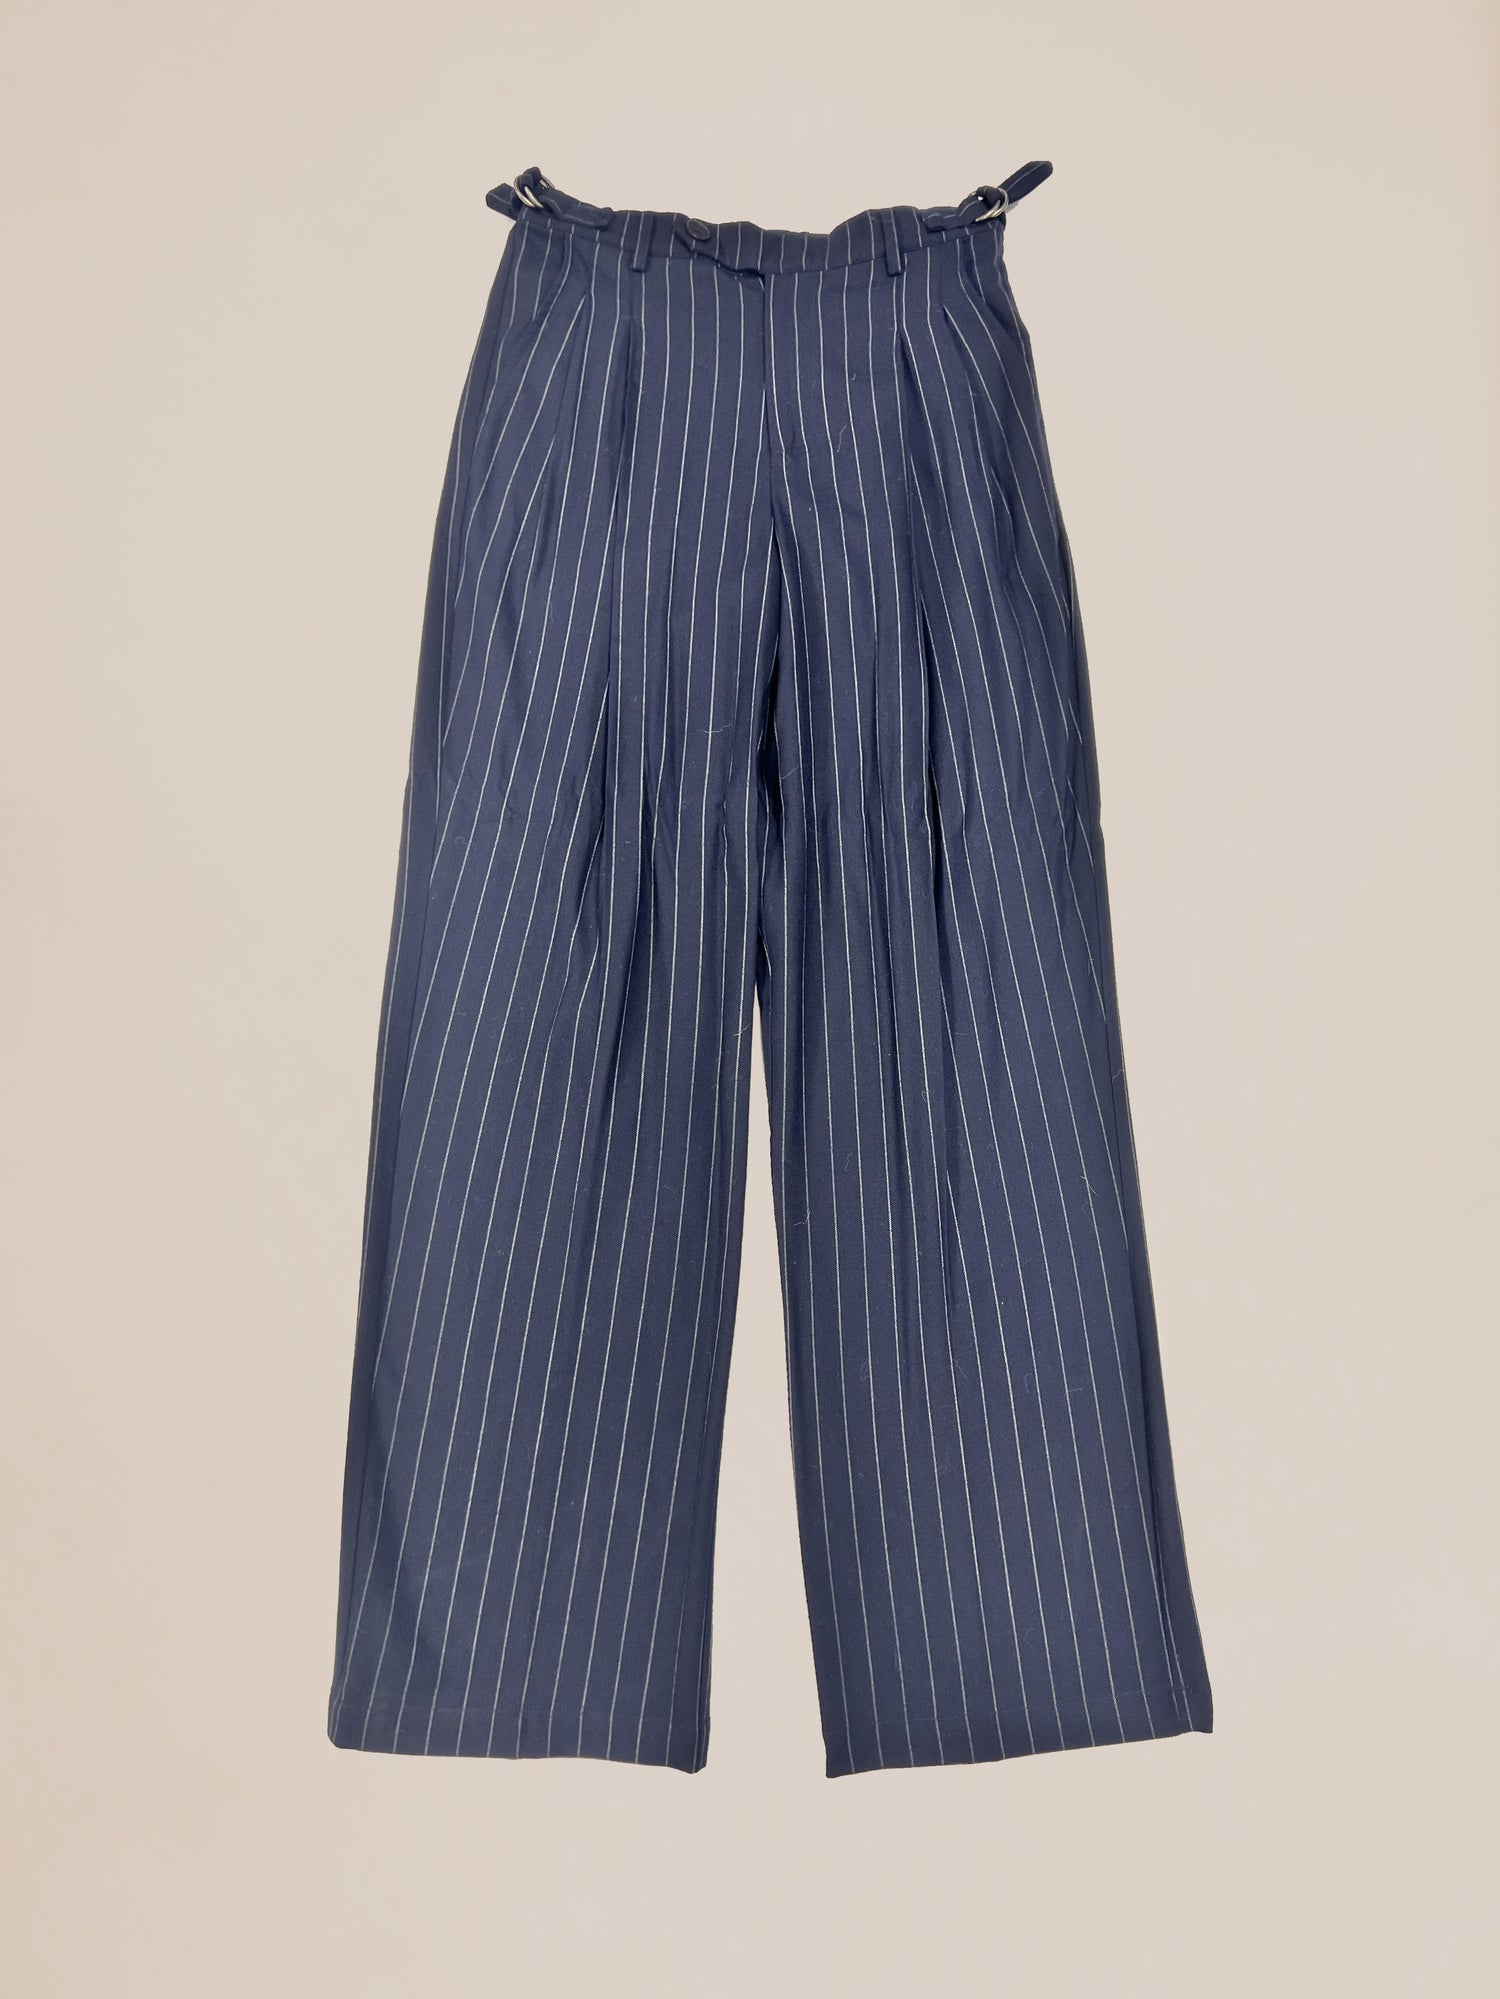 Pre-production Profound Sample 38 navy pinstripe trousers with a gathered waist on a beige background.